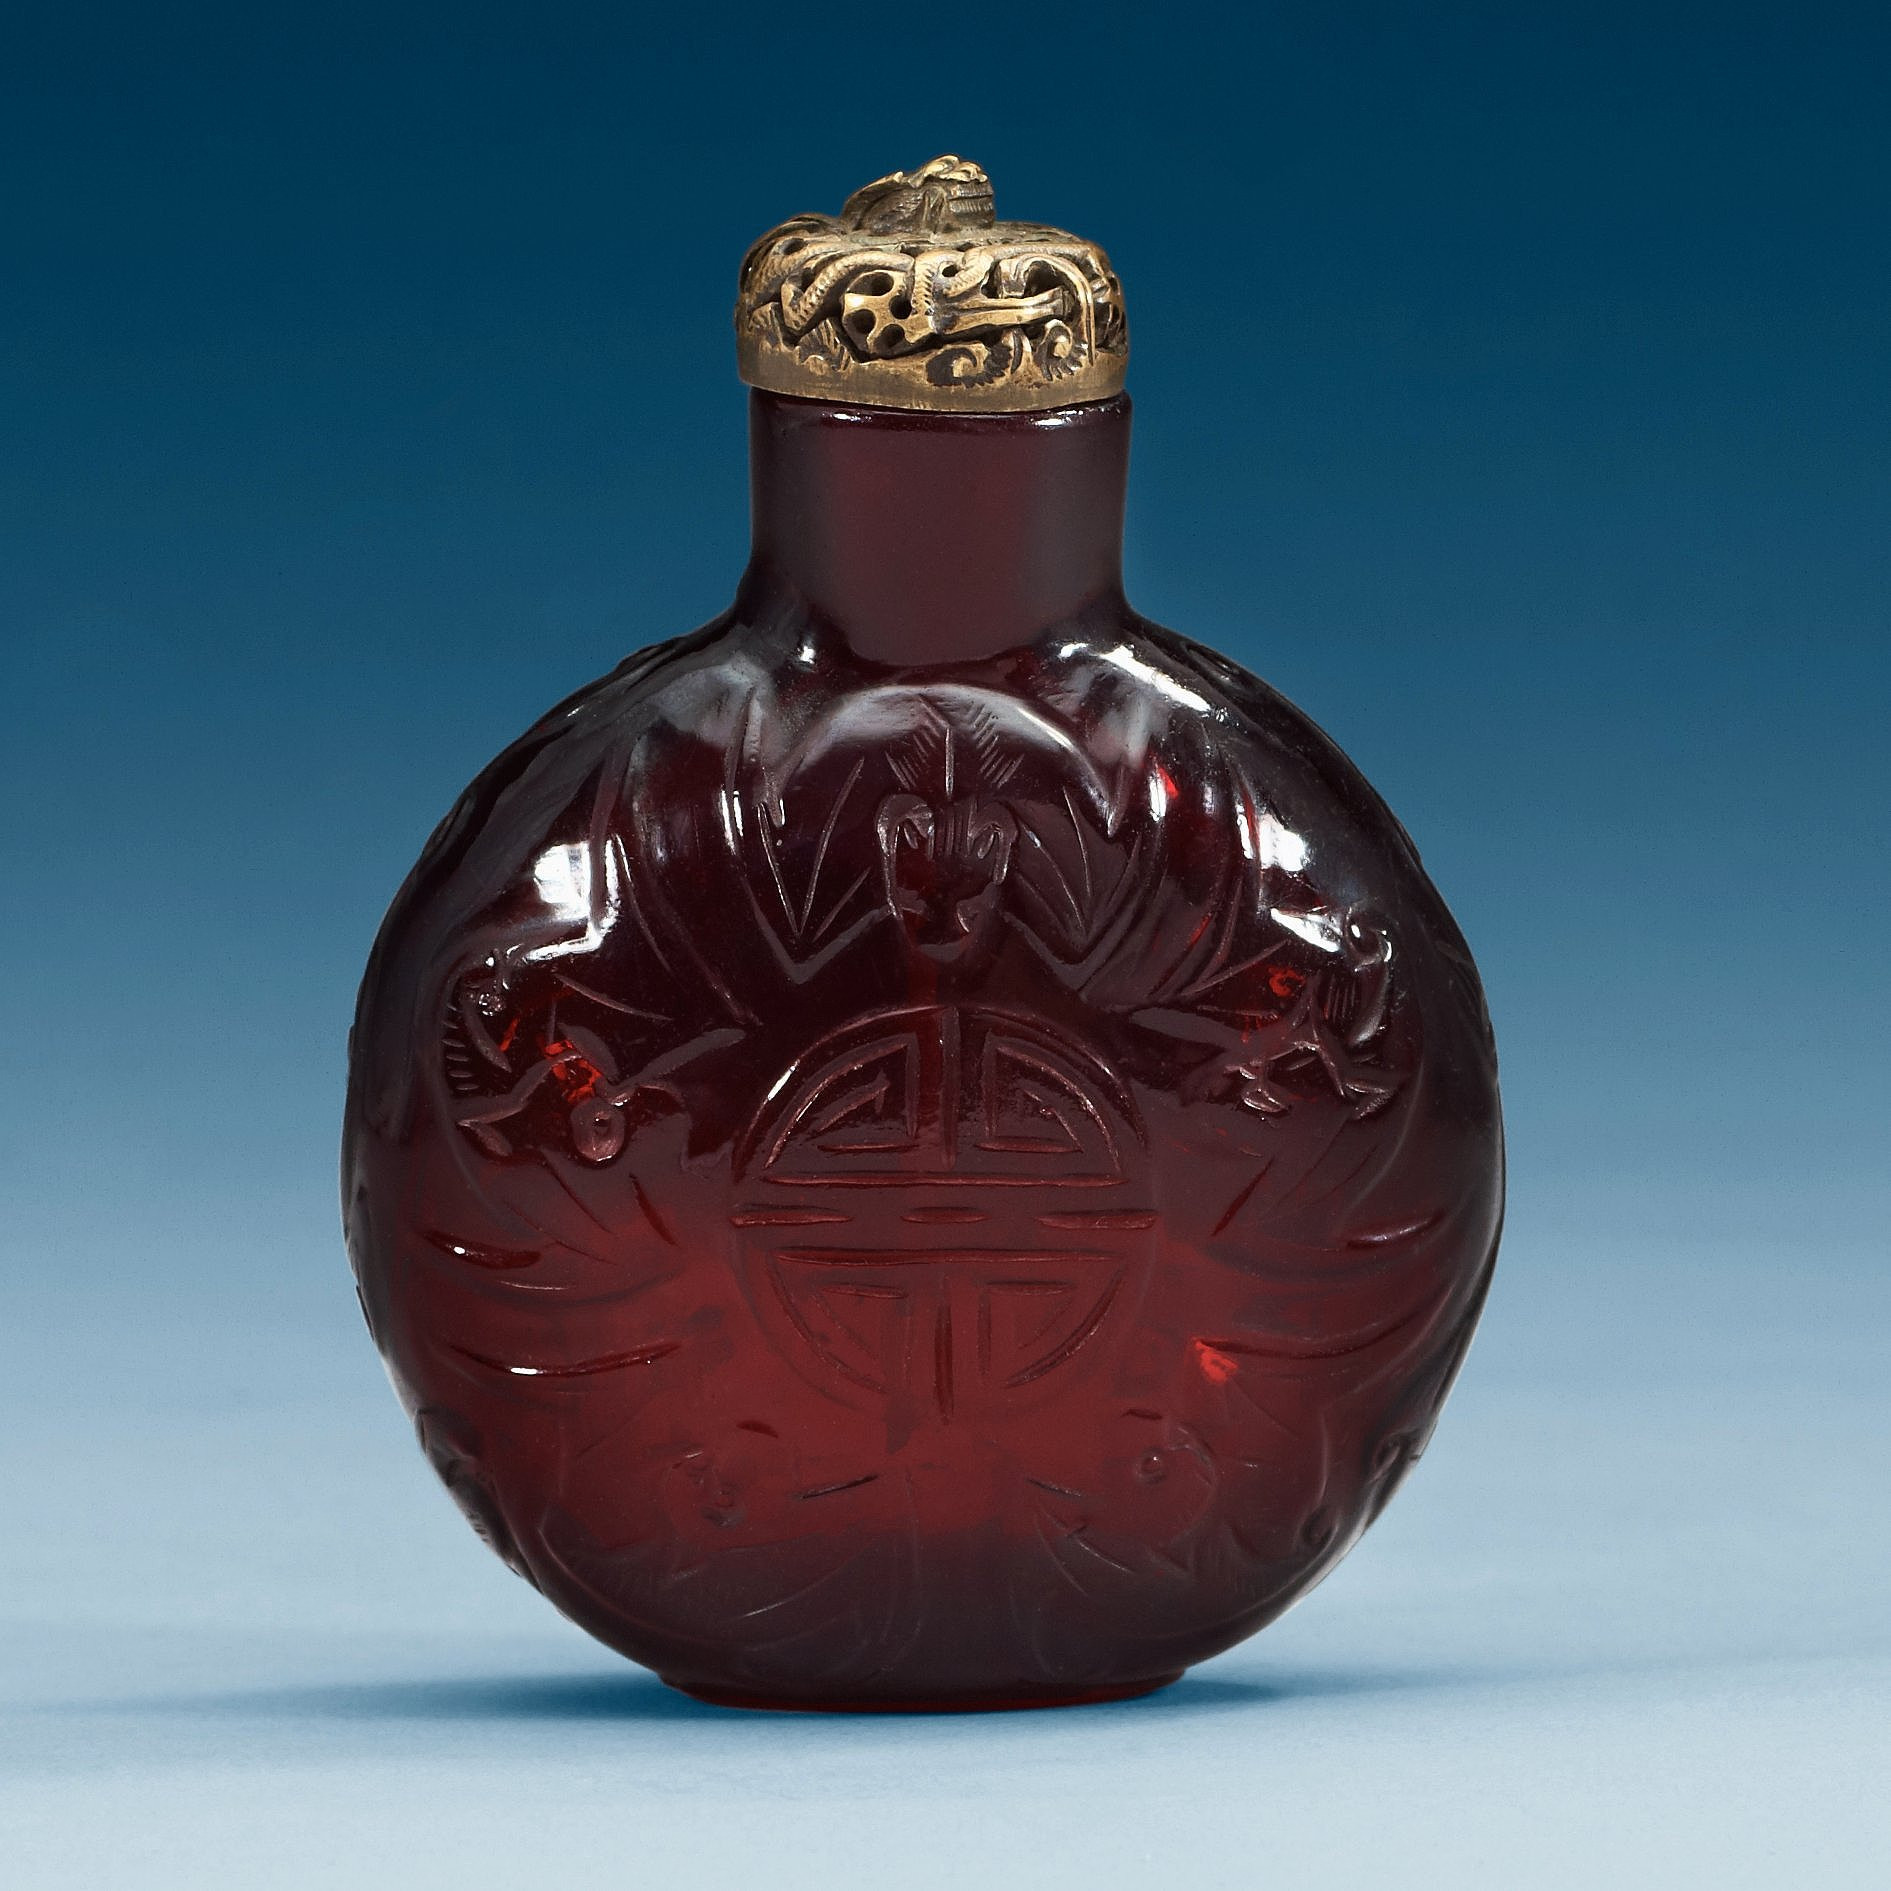 peking glass vase for sale of a large red sculptured peking glass snuff bottle with stopper in a large red sculptured peking glass snuff bottle with stopper presumably around 1900 bukowskis